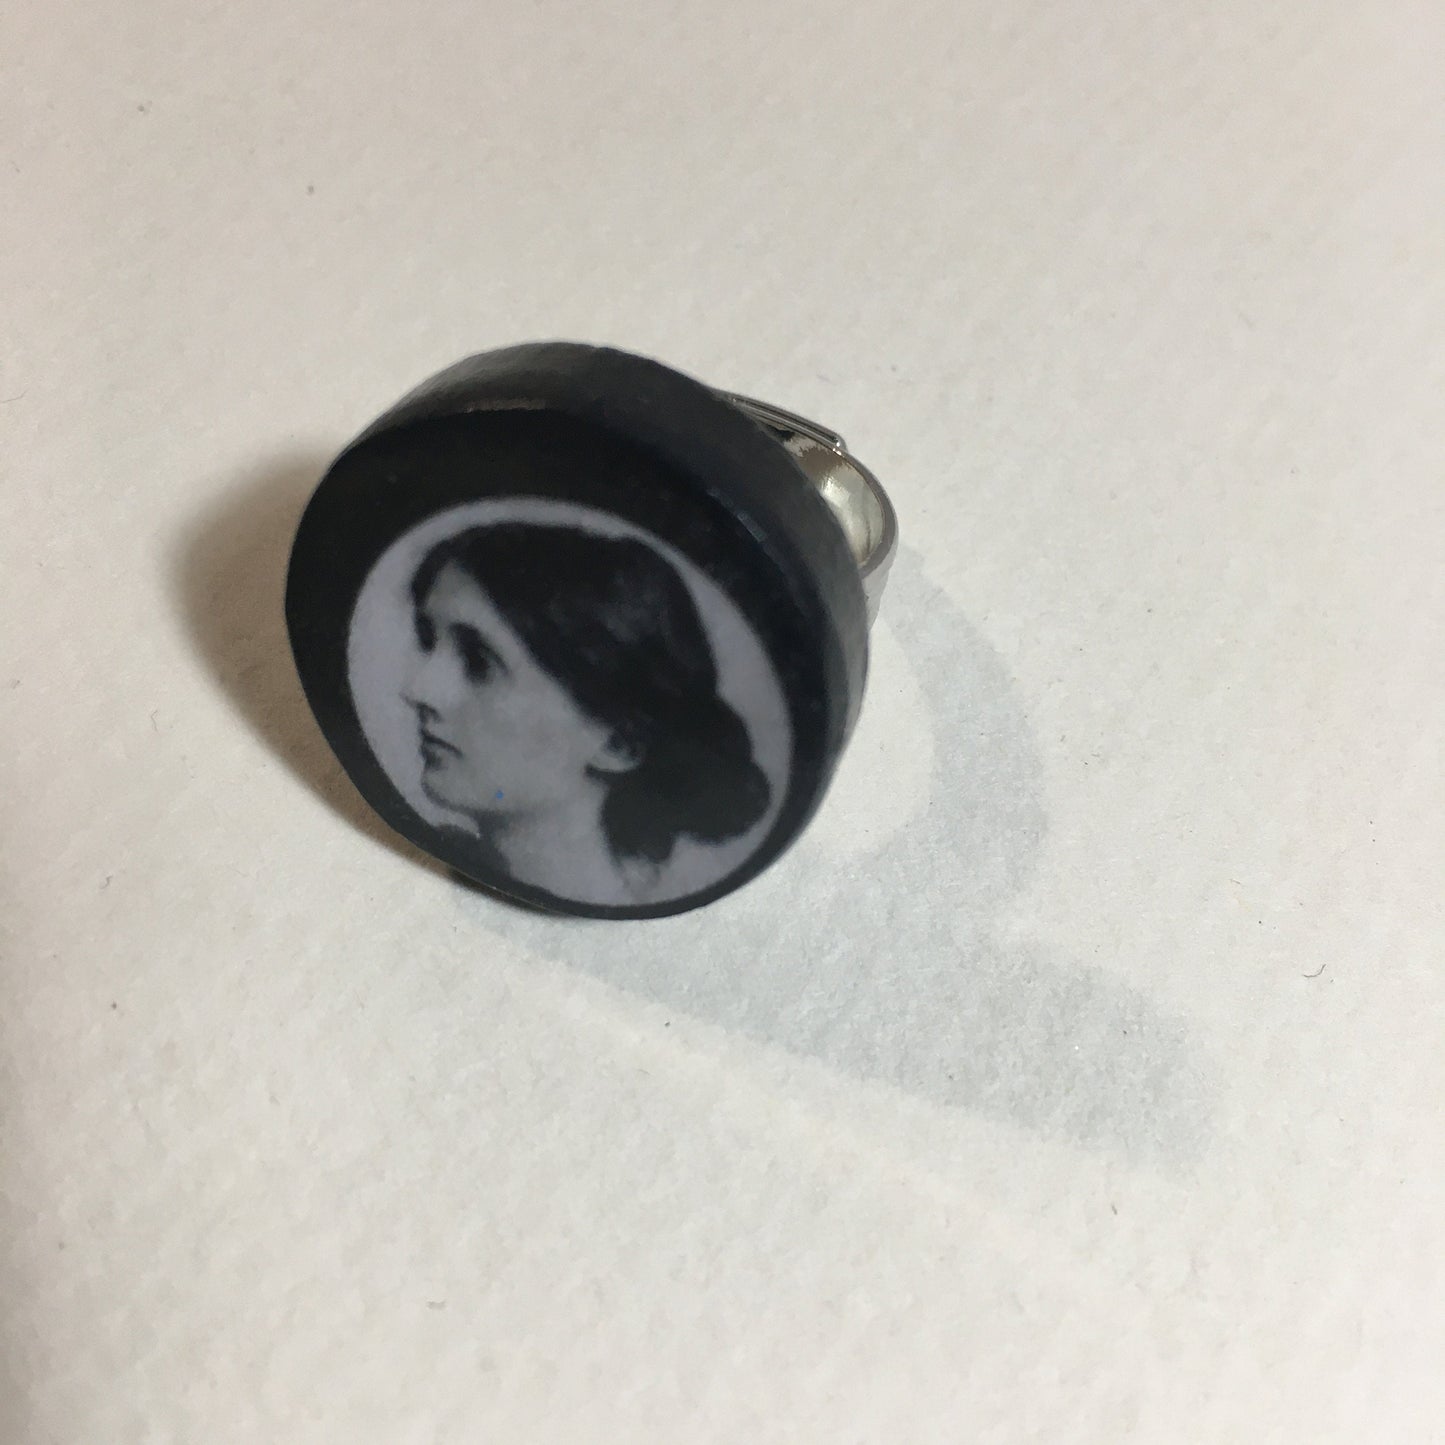 Virginia Woolf gift. Feminist gift, quirky wooden round ring.